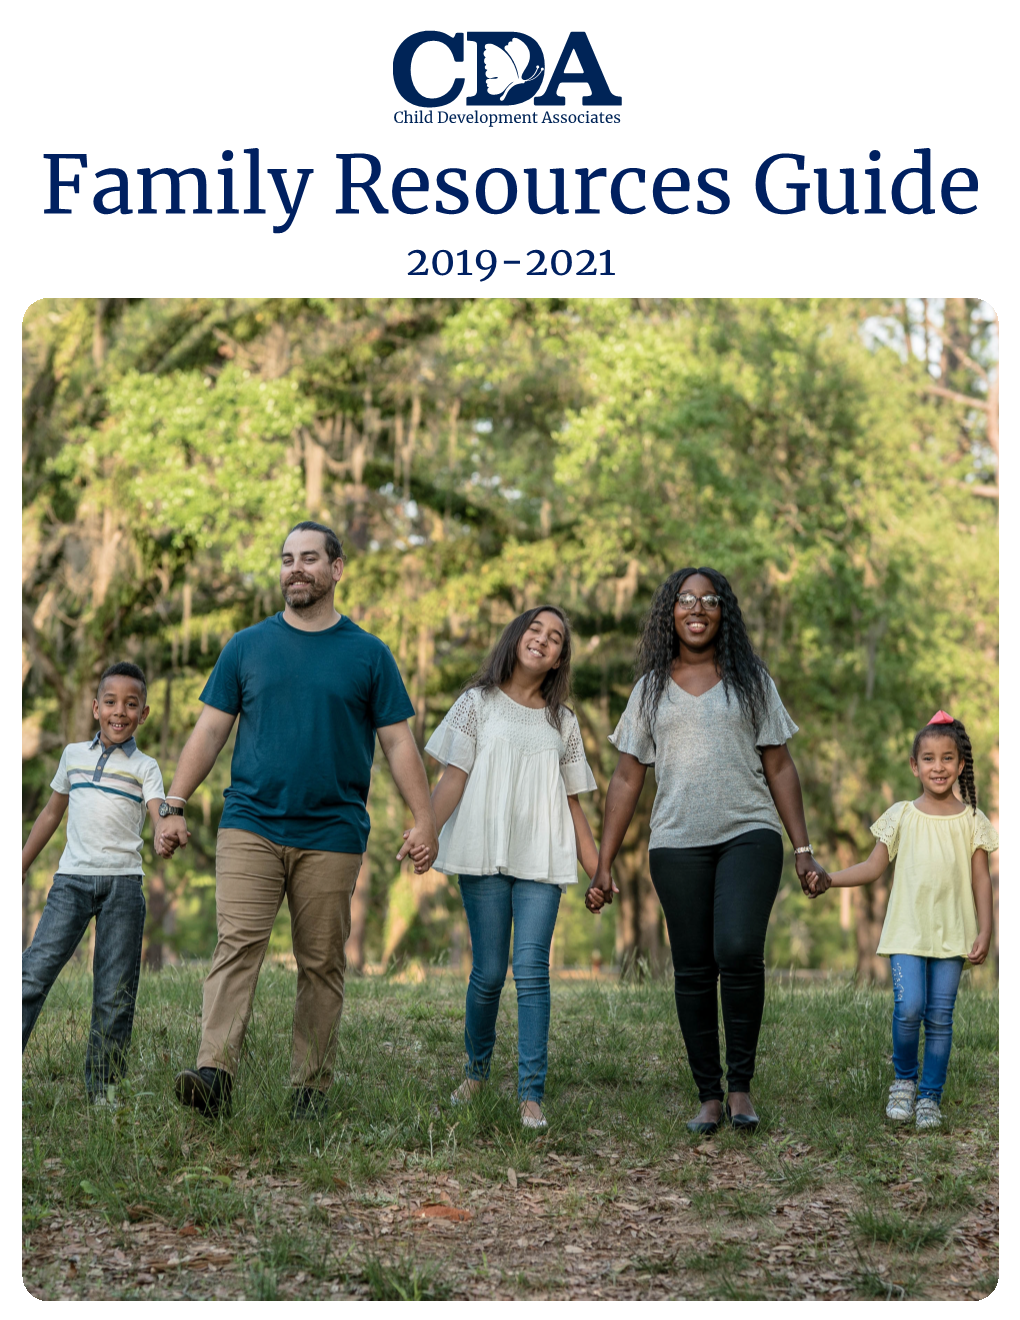 Family Resources Guide 2019-2021